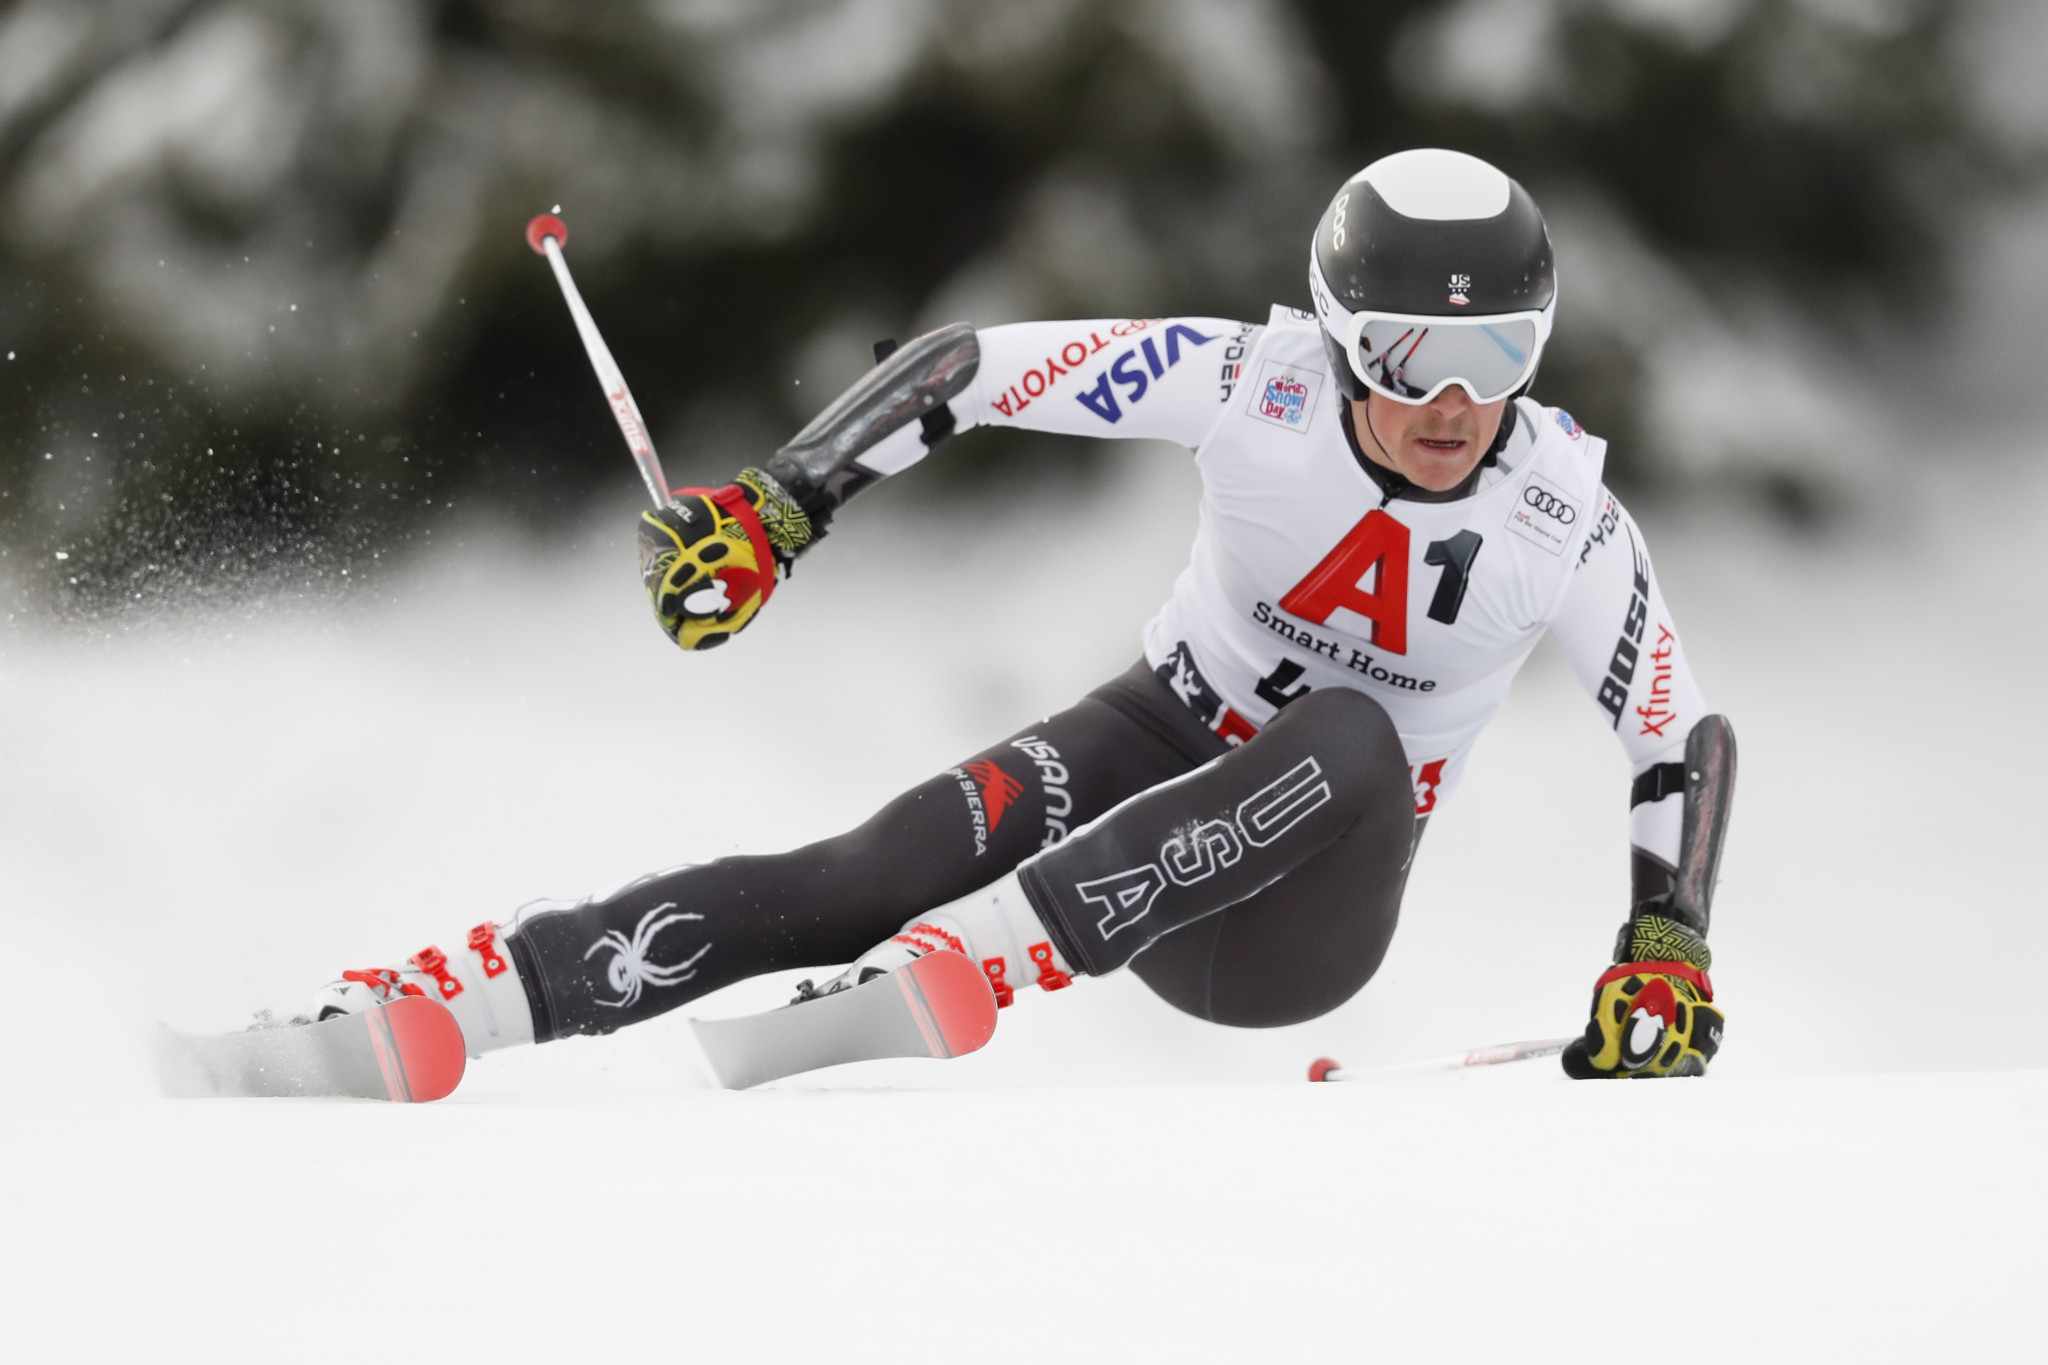 First medal for US at FIS World Junior Alpine Skiing Championships as Radamus wins men's superG